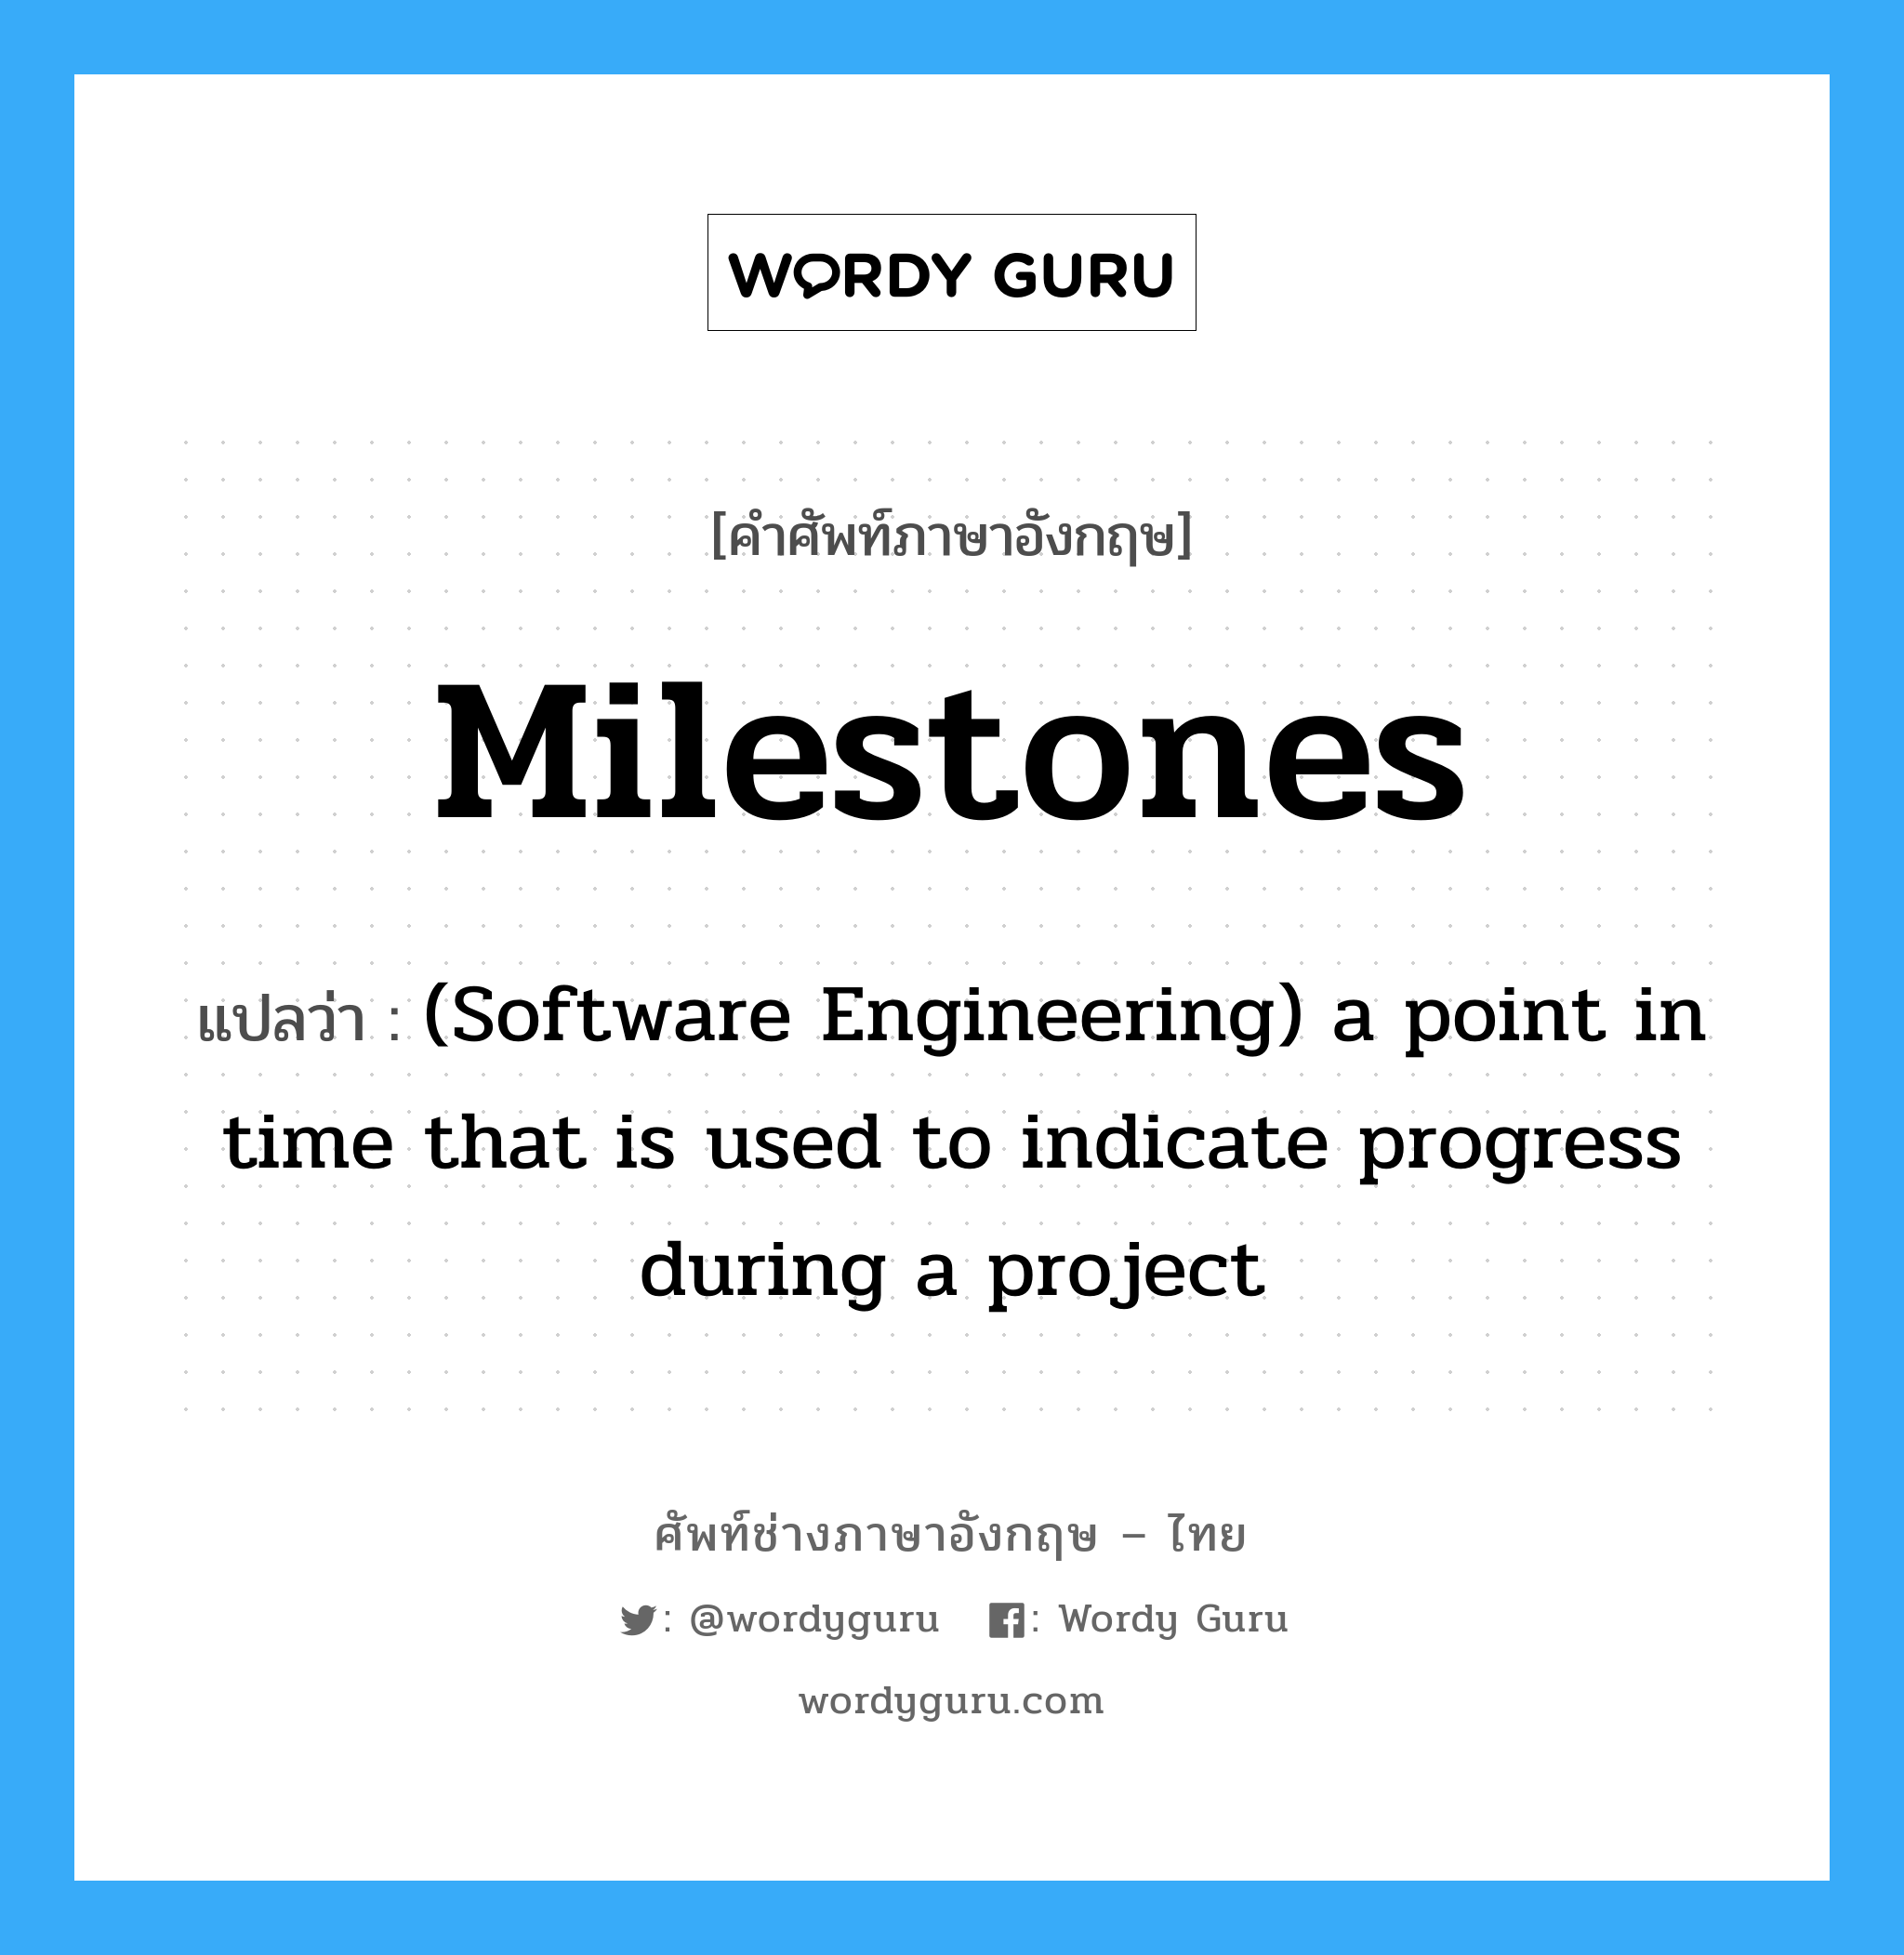 (Software Engineering) a point in time that is used to indicate progress during a project ภาษาอังกฤษ?, คำศัพท์ช่างภาษาอังกฤษ - ไทย (Software Engineering) a point in time that is used to indicate progress during a project คำศัพท์ภาษาอังกฤษ (Software Engineering) a point in time that is used to indicate progress during a project แปลว่า Milestones